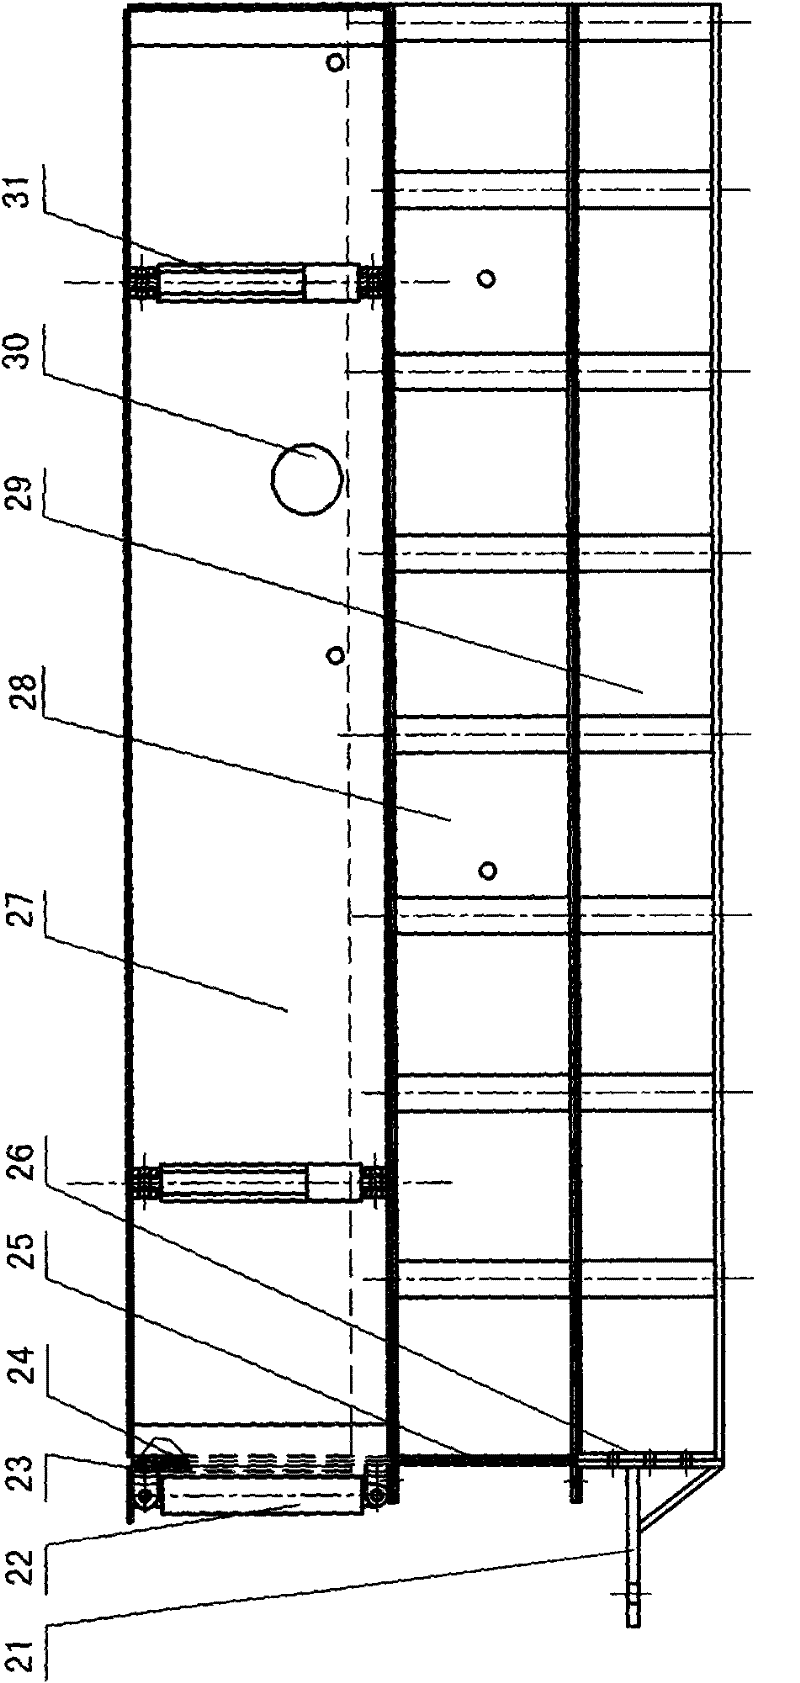 Supporting method for gob-side entry retaining and its sliding form for injection entry